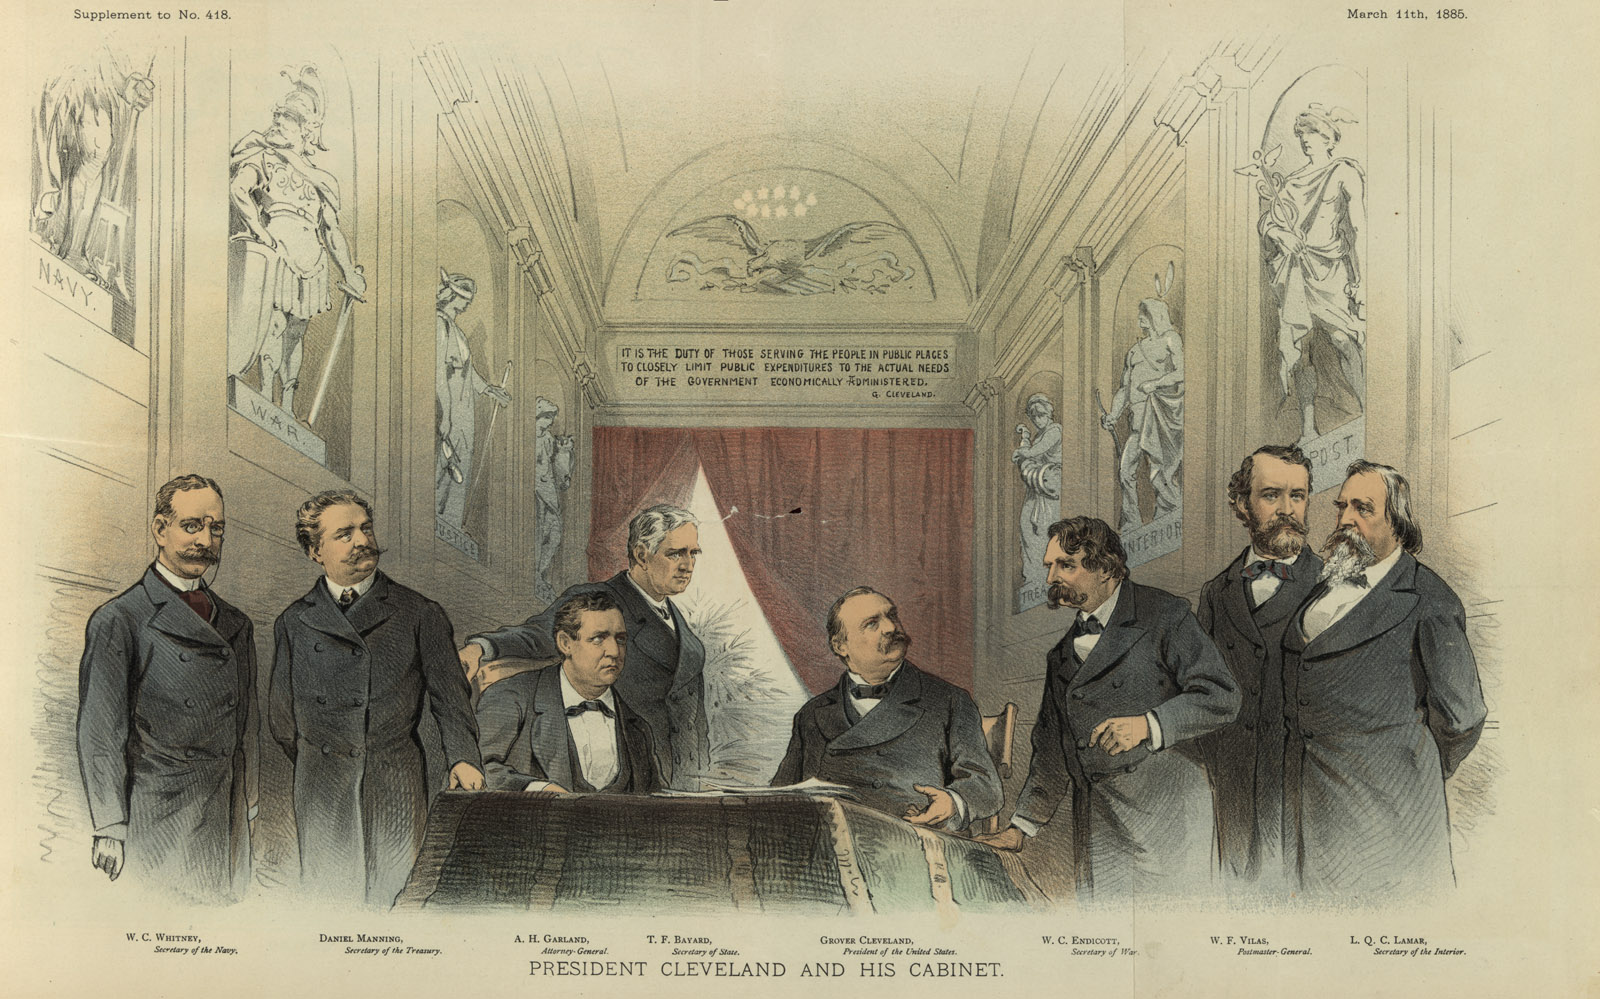 Illustration by Joseph Ferdinand Keppler showing President Cleveland sitting at a desk between his cabinet members, with Secretary of the Navy W.C. Whitney on the left (Library of Congress, Prints & Photographs Division, [LC-DIG-ppmsca-28178])